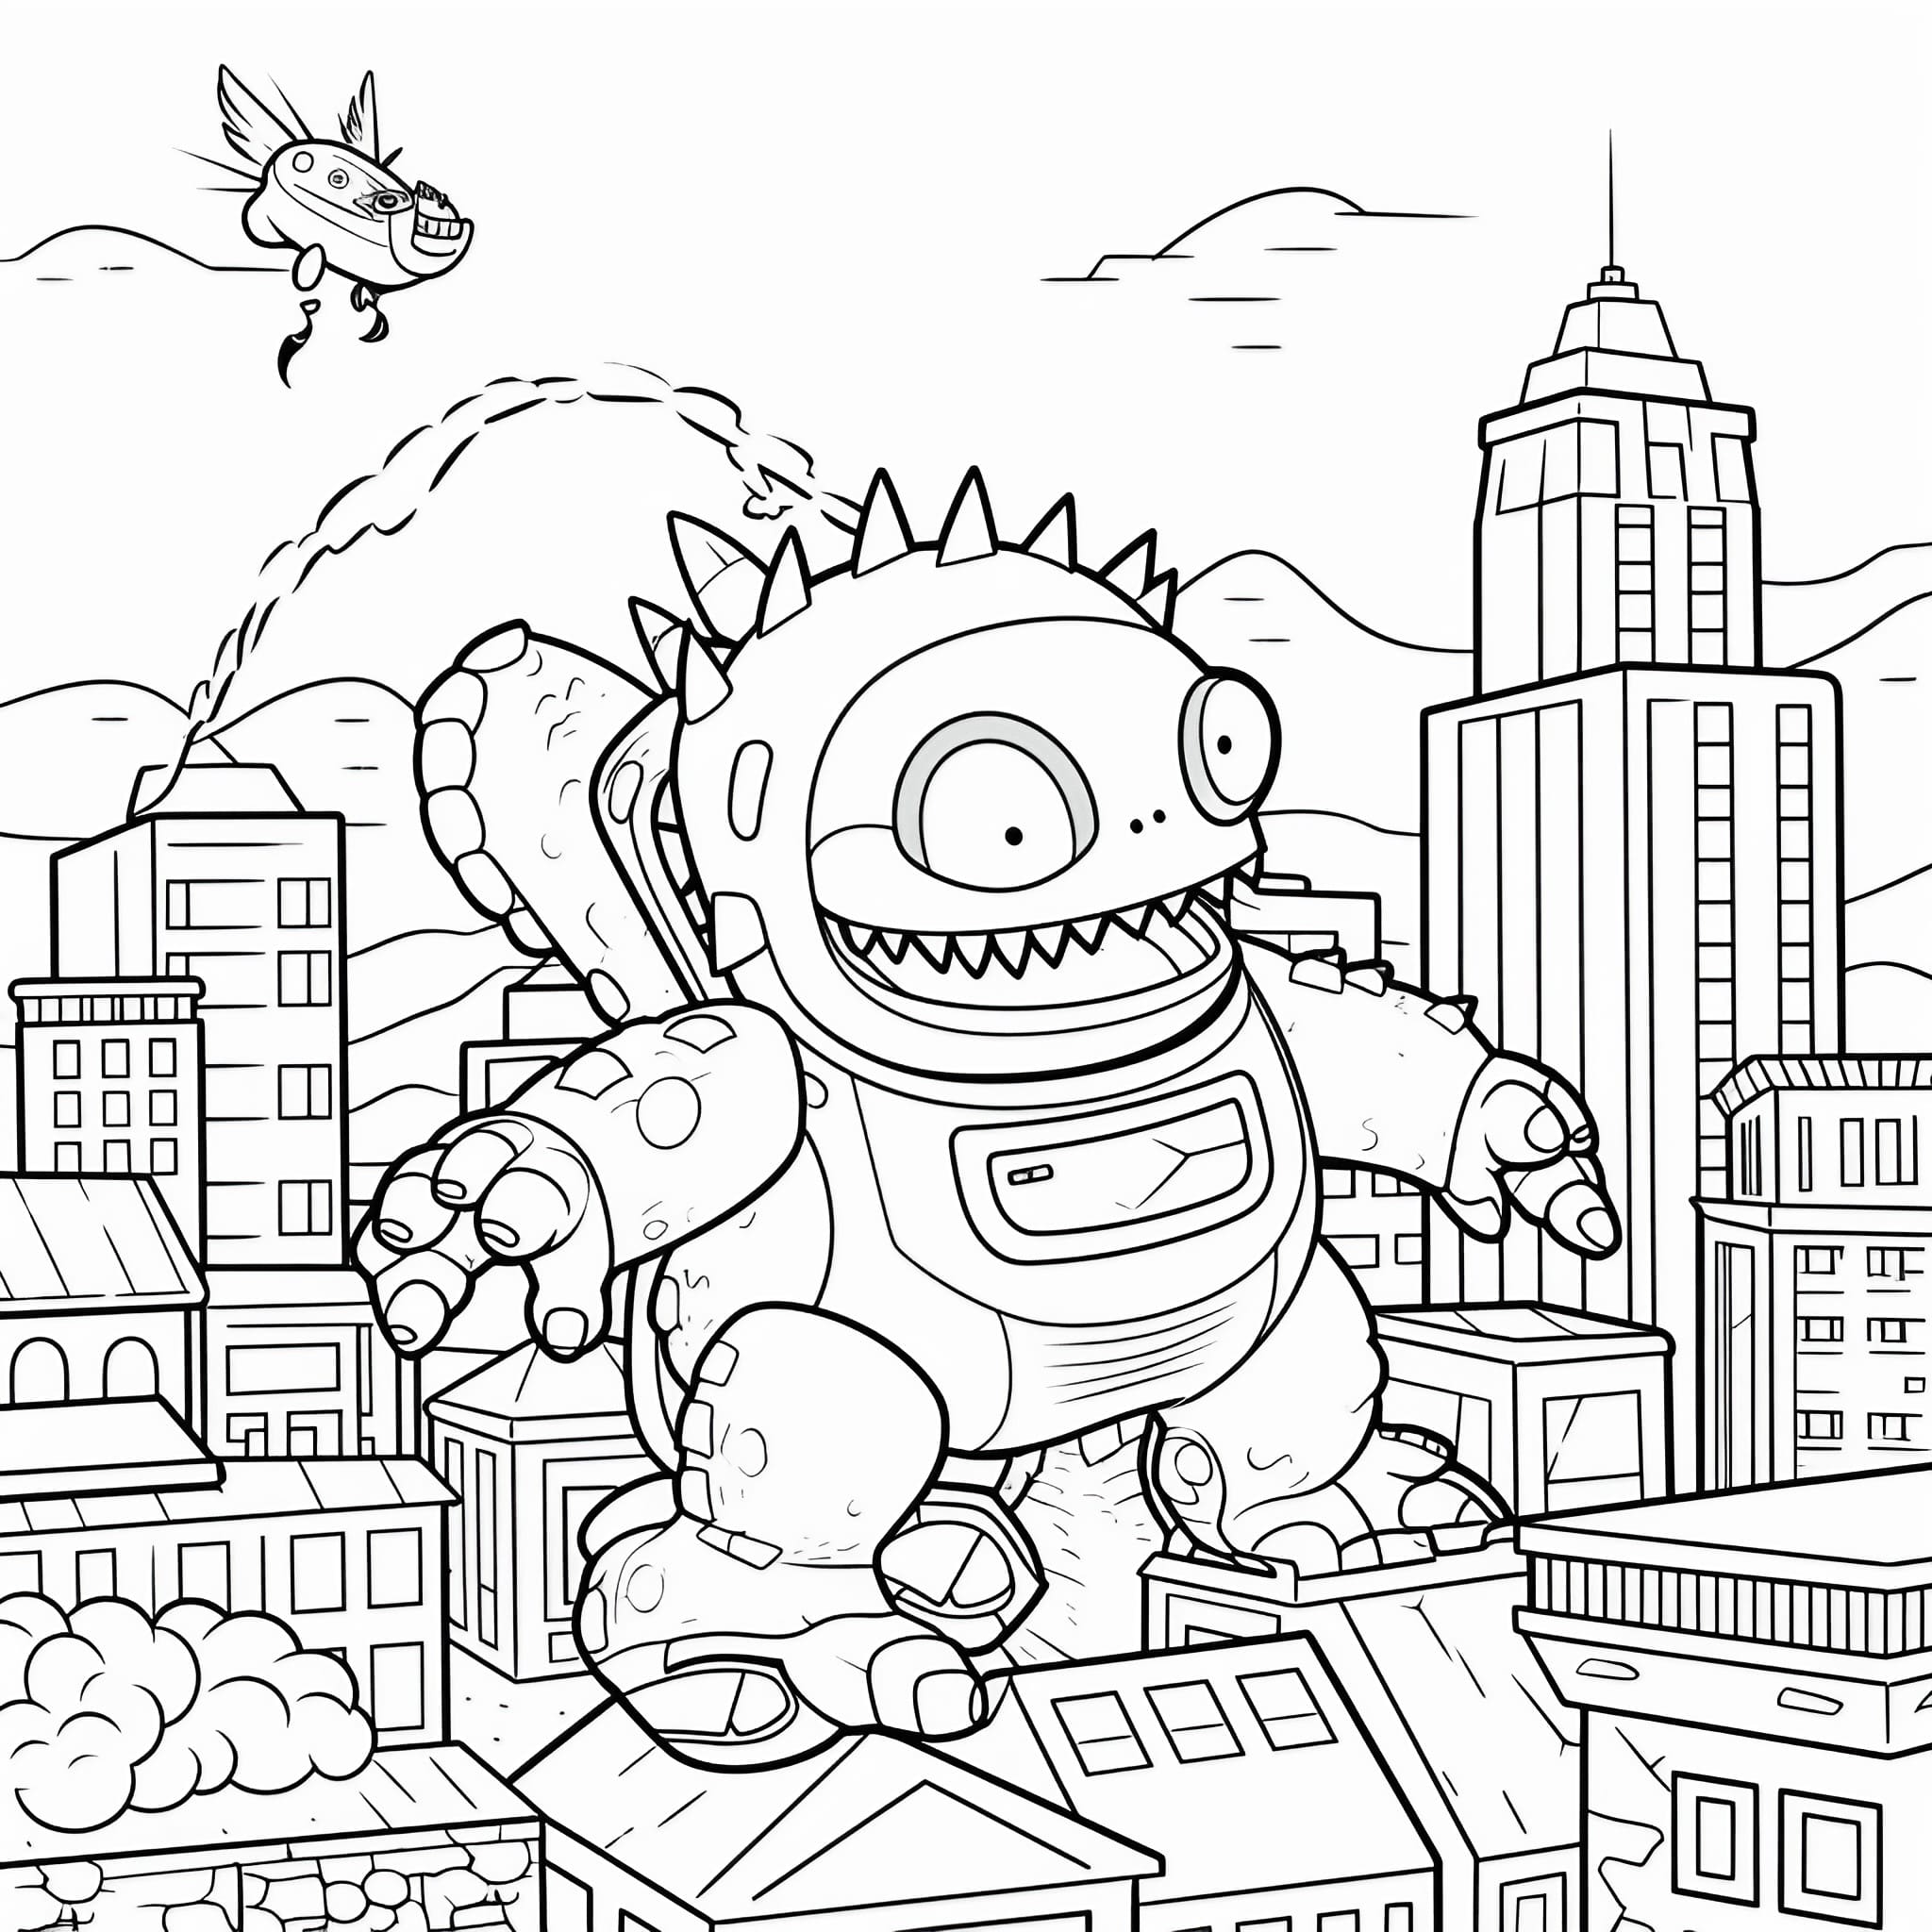 Godzilla coloring pages for free printable